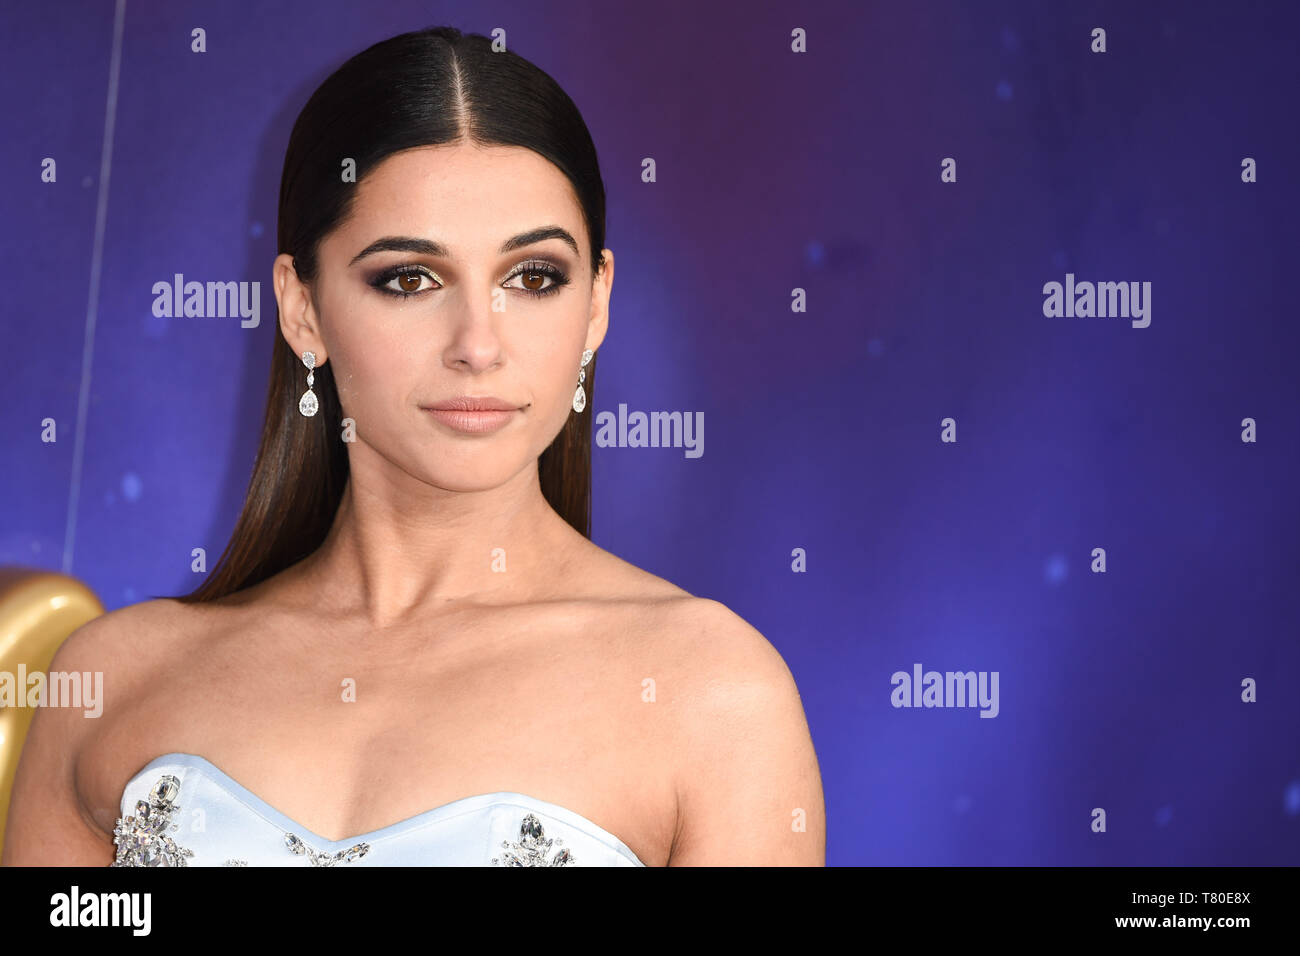 London, UK. 09th May, 2019. LONDON, UK. May 09, 2019: Naomi Scott at the 'Aladdin' premiere at the Odeon Luxe, Leicester Square, London. Picture: Steve Vas/Featureflash Credit: Paul Smith/Alamy Live News Stock Photo